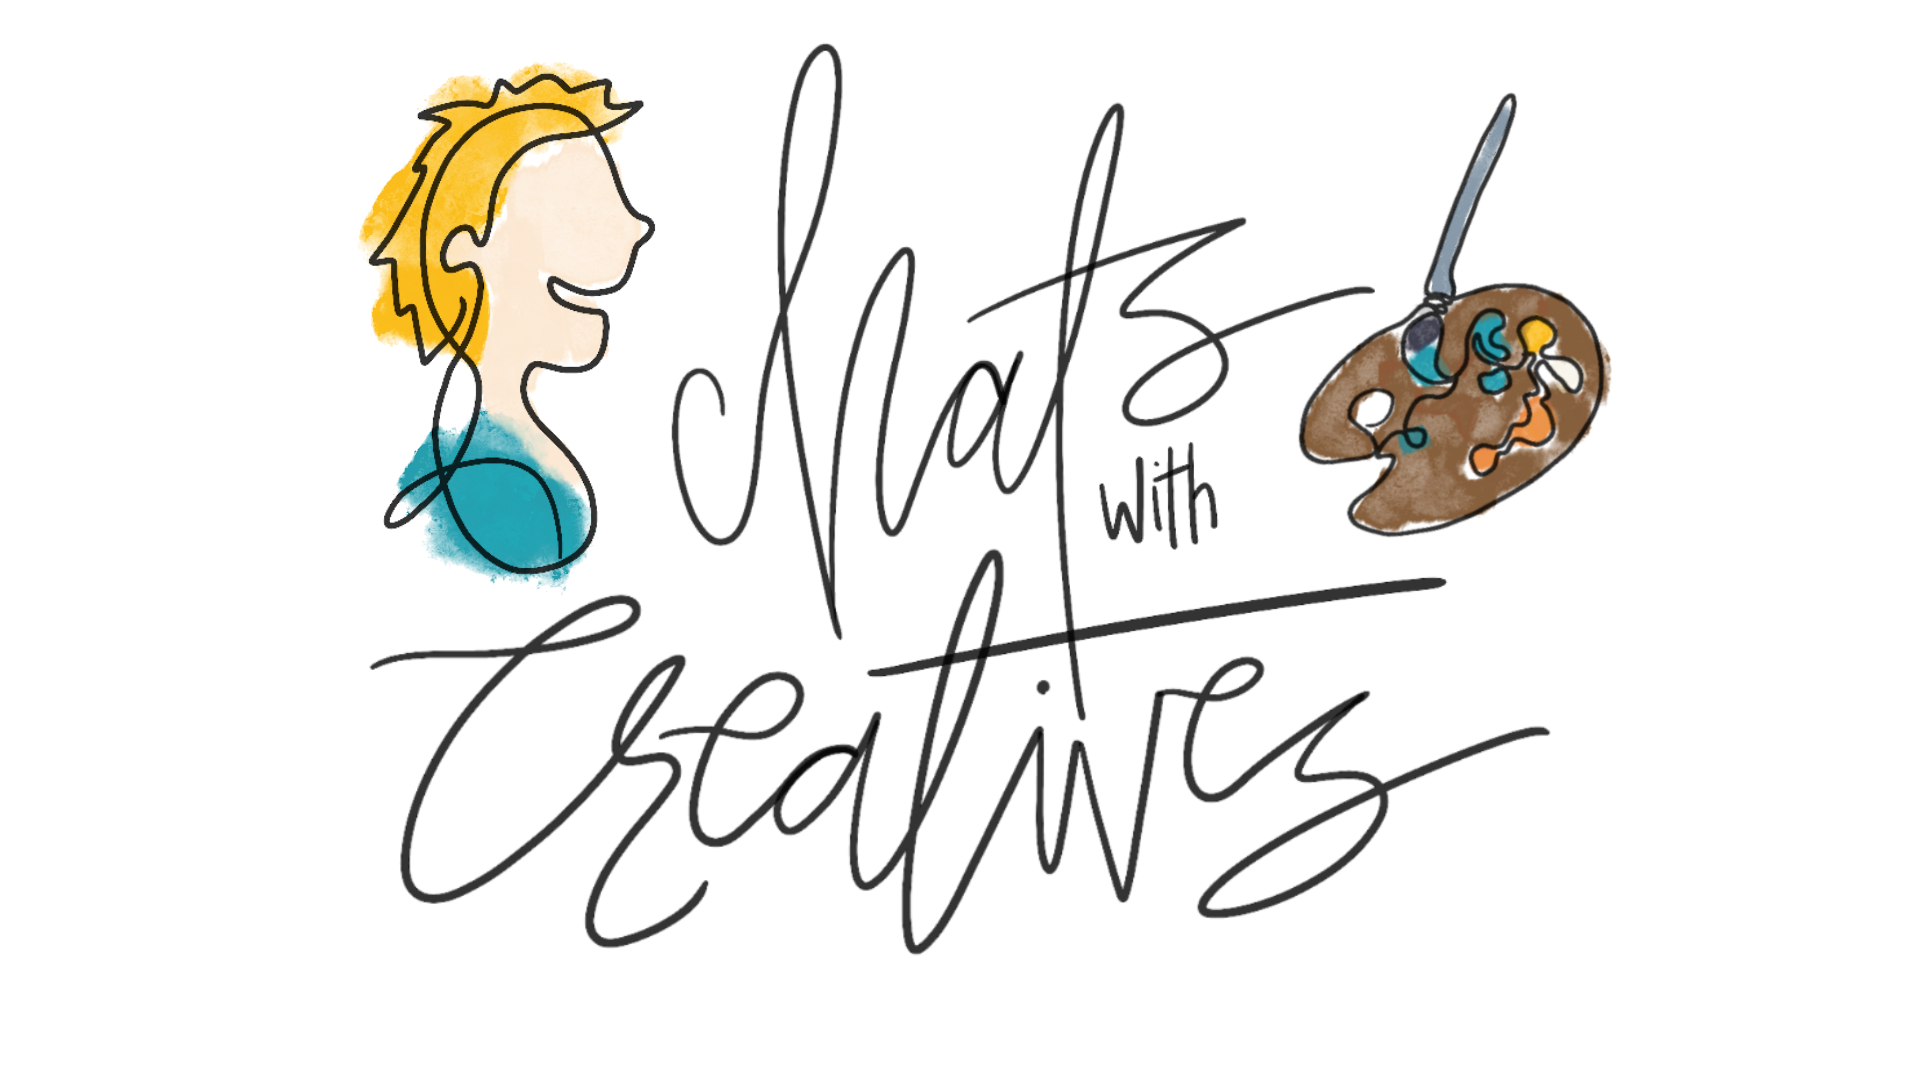 chats with creatives logo